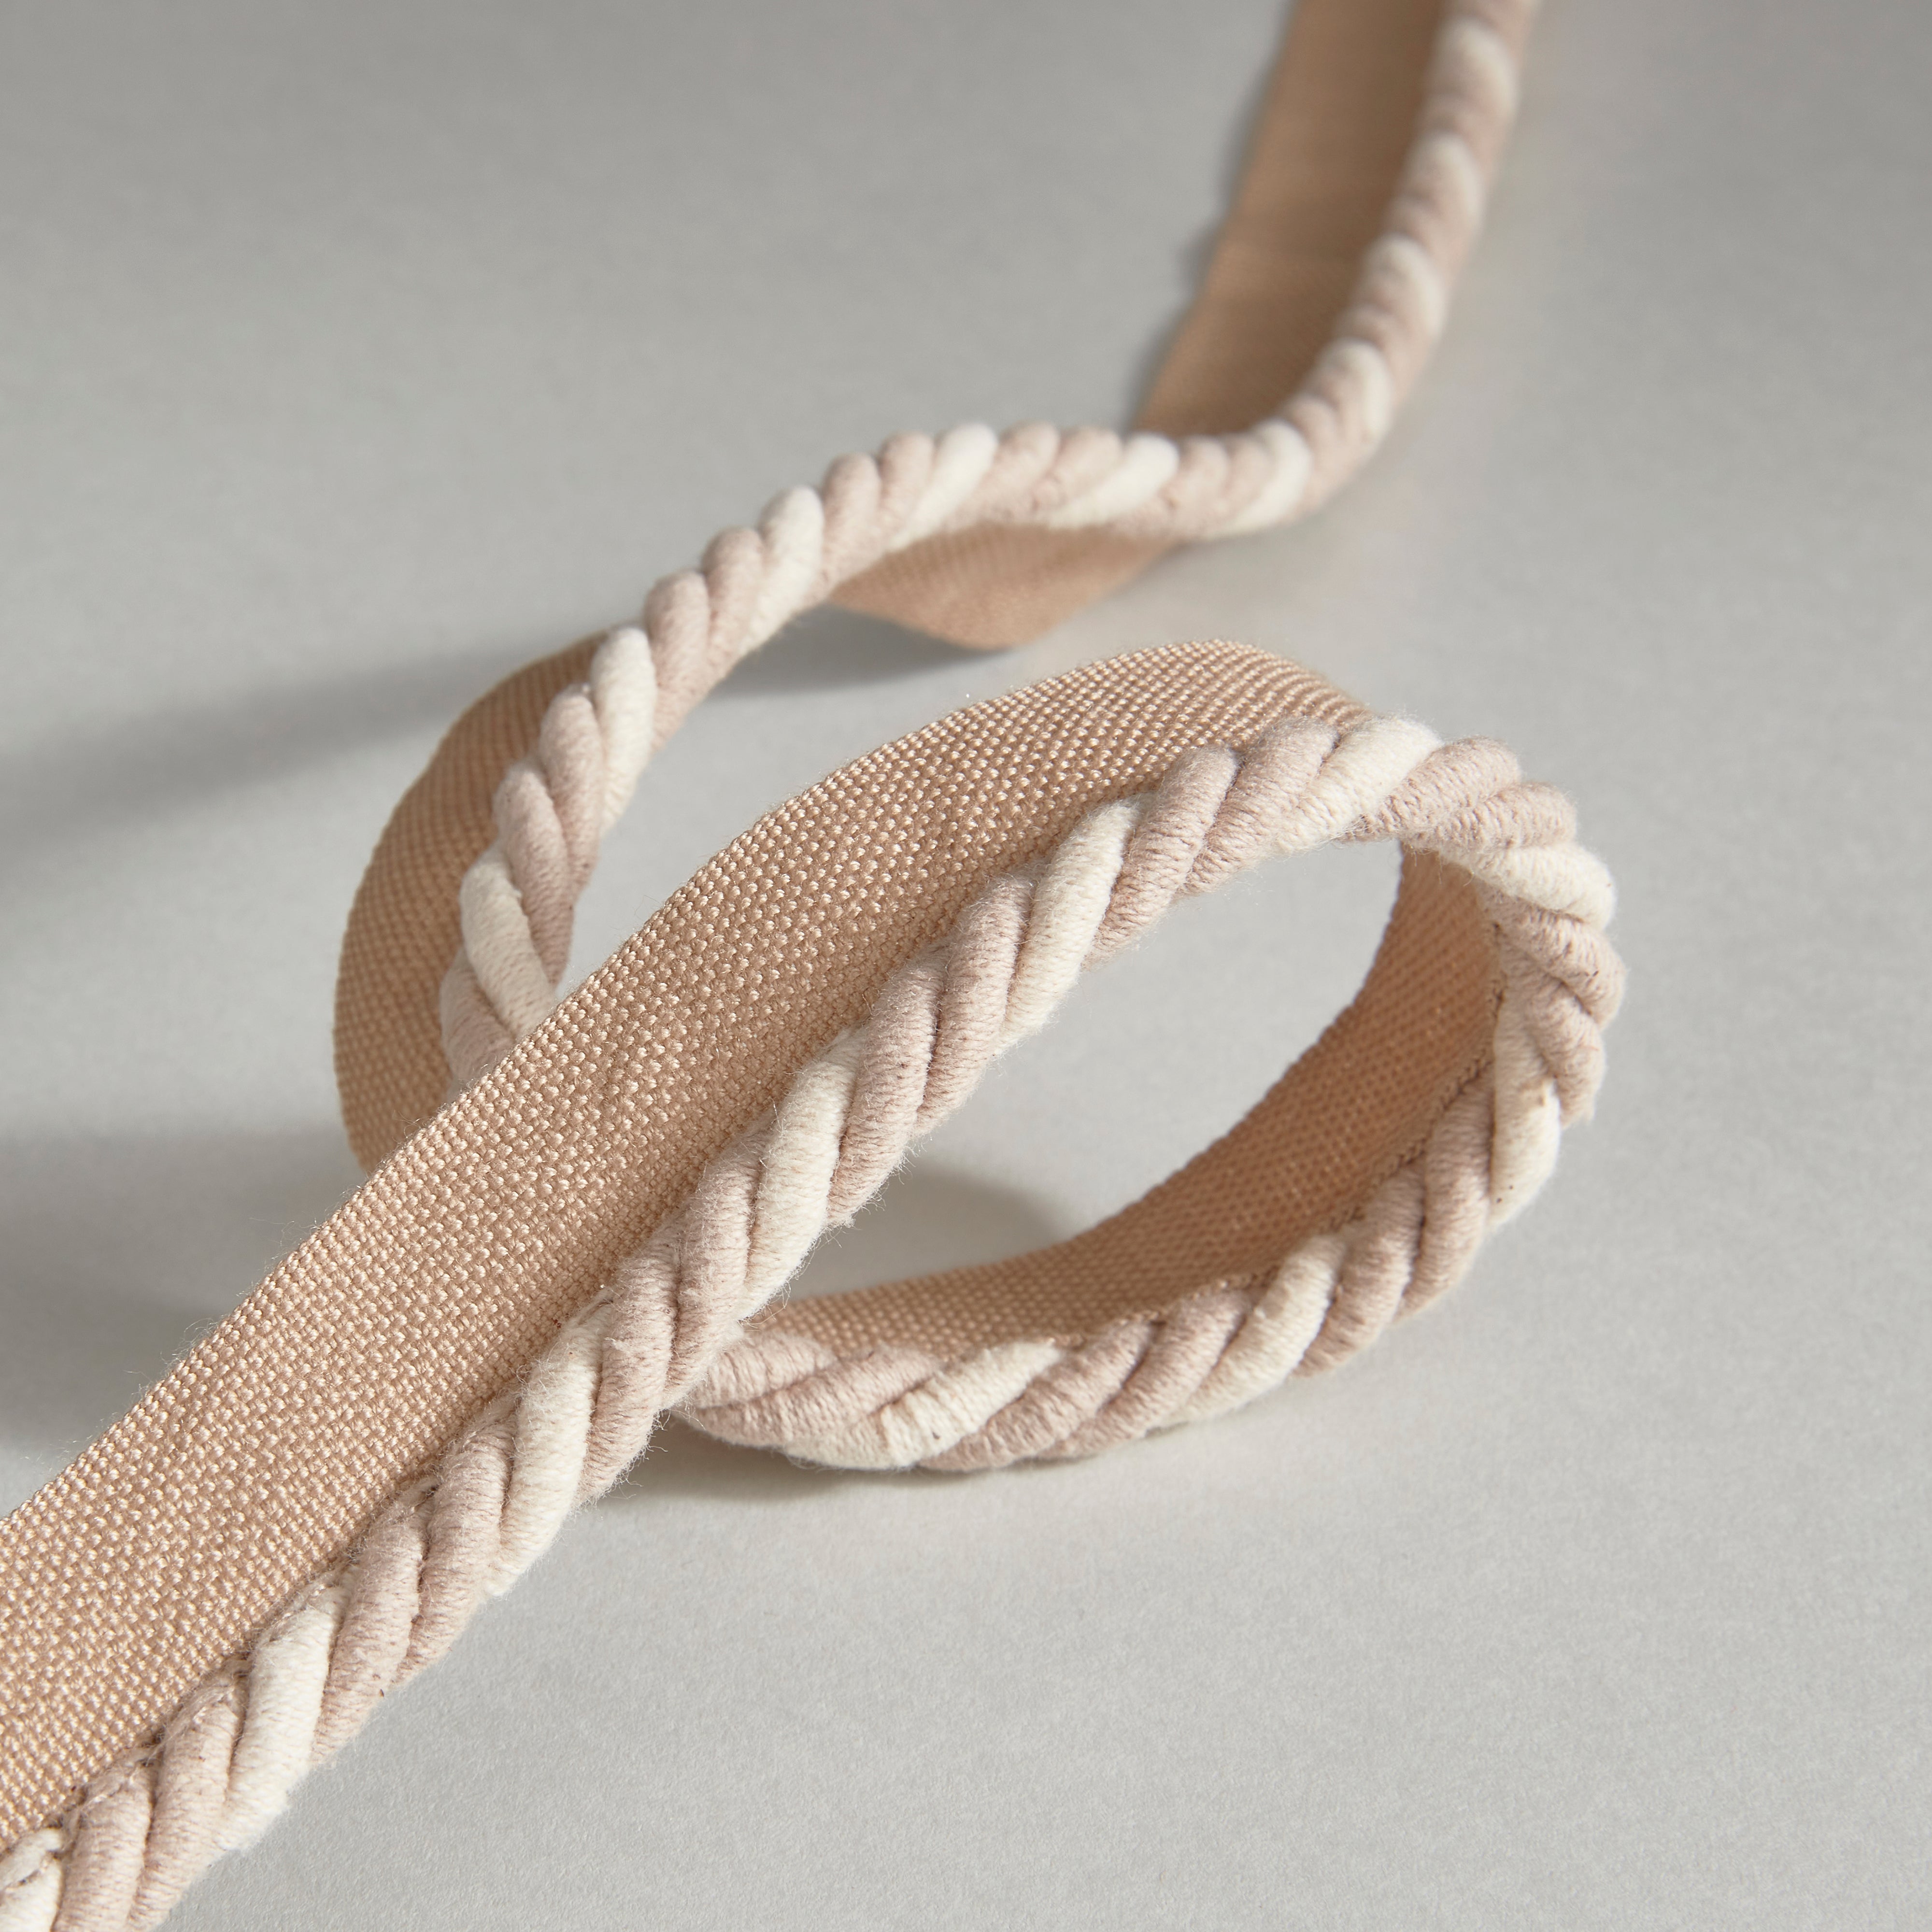 Sash Cord 8mm Waxed Cotton 15m Knot 